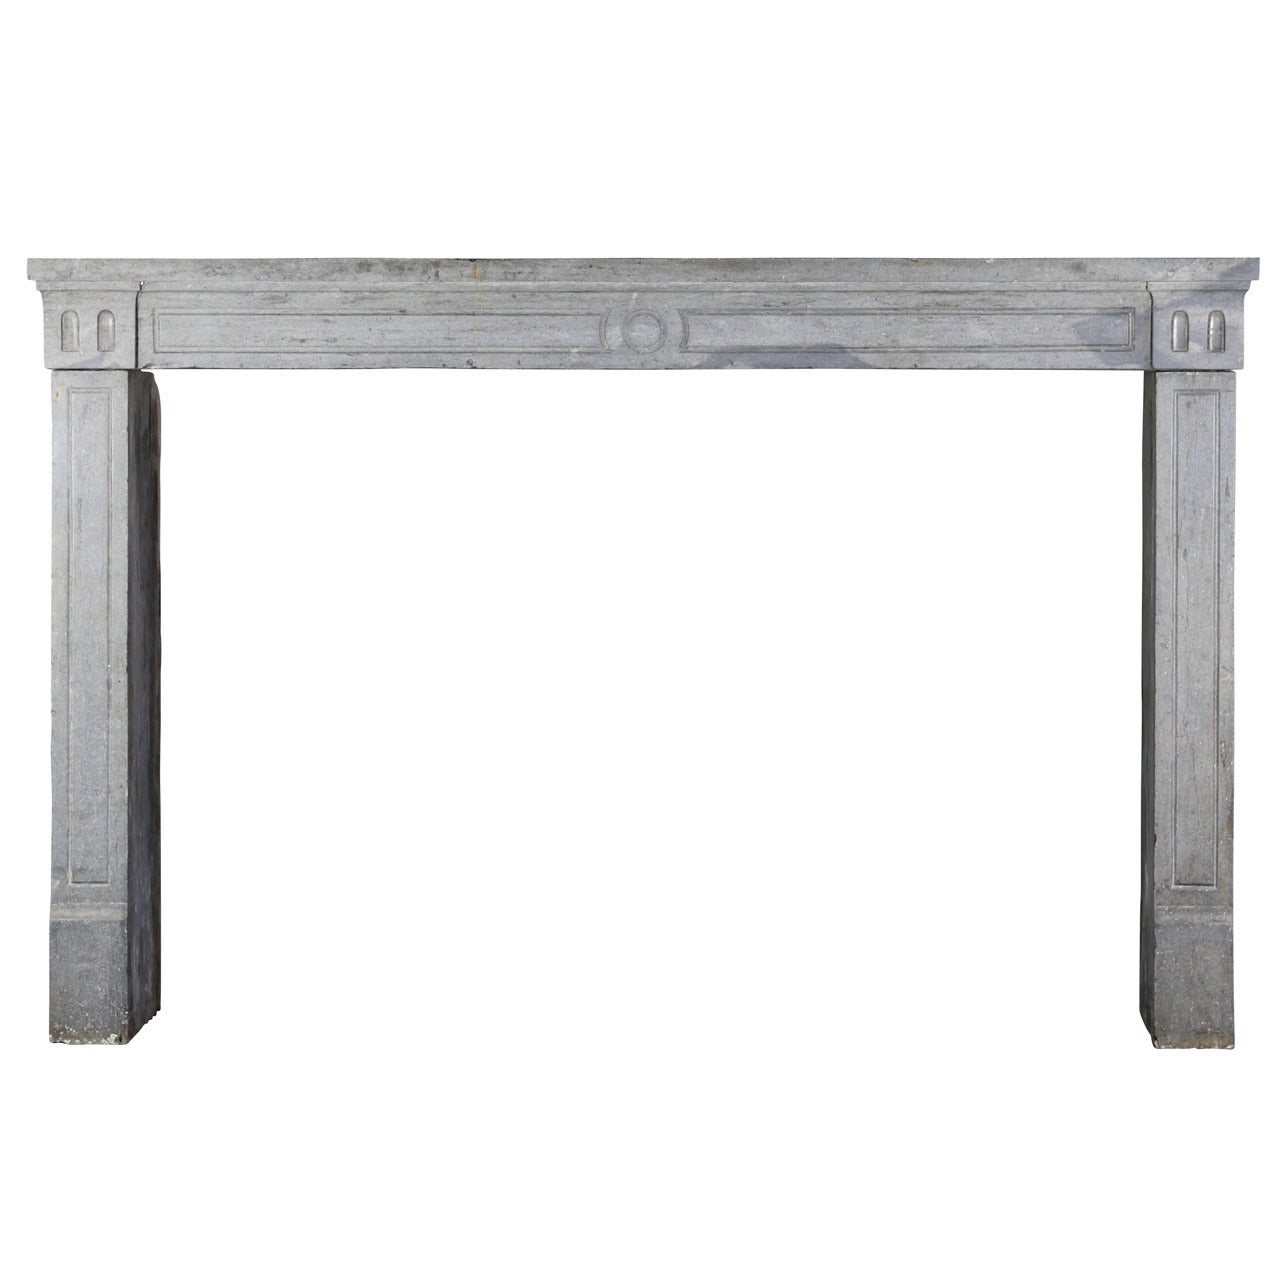 18th Century Period Fine French Marble-Stone Antique Fireplace Mantel